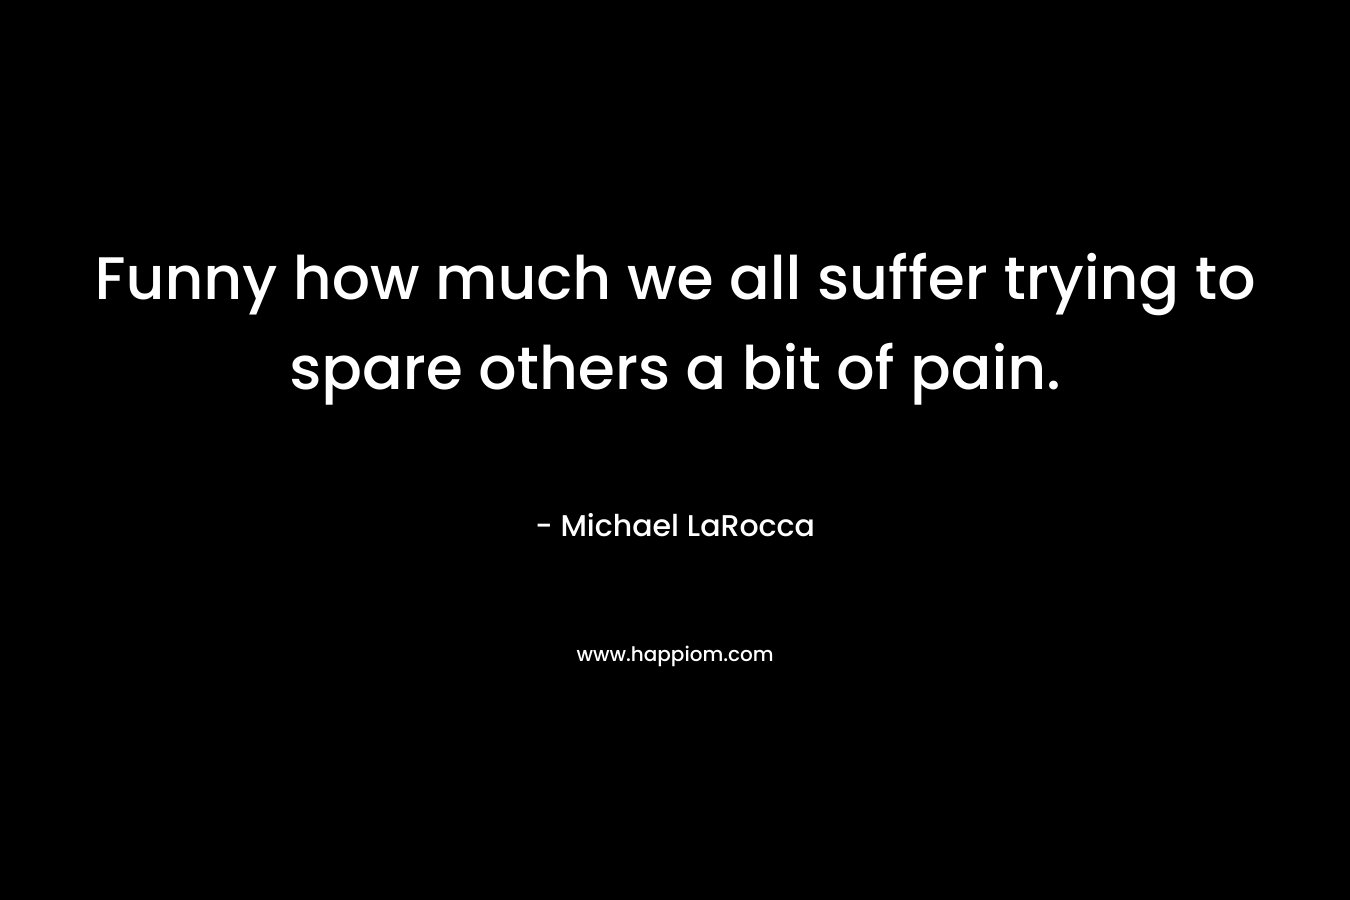 Funny how much we all suffer trying to spare others a bit of pain. – Michael LaRocca